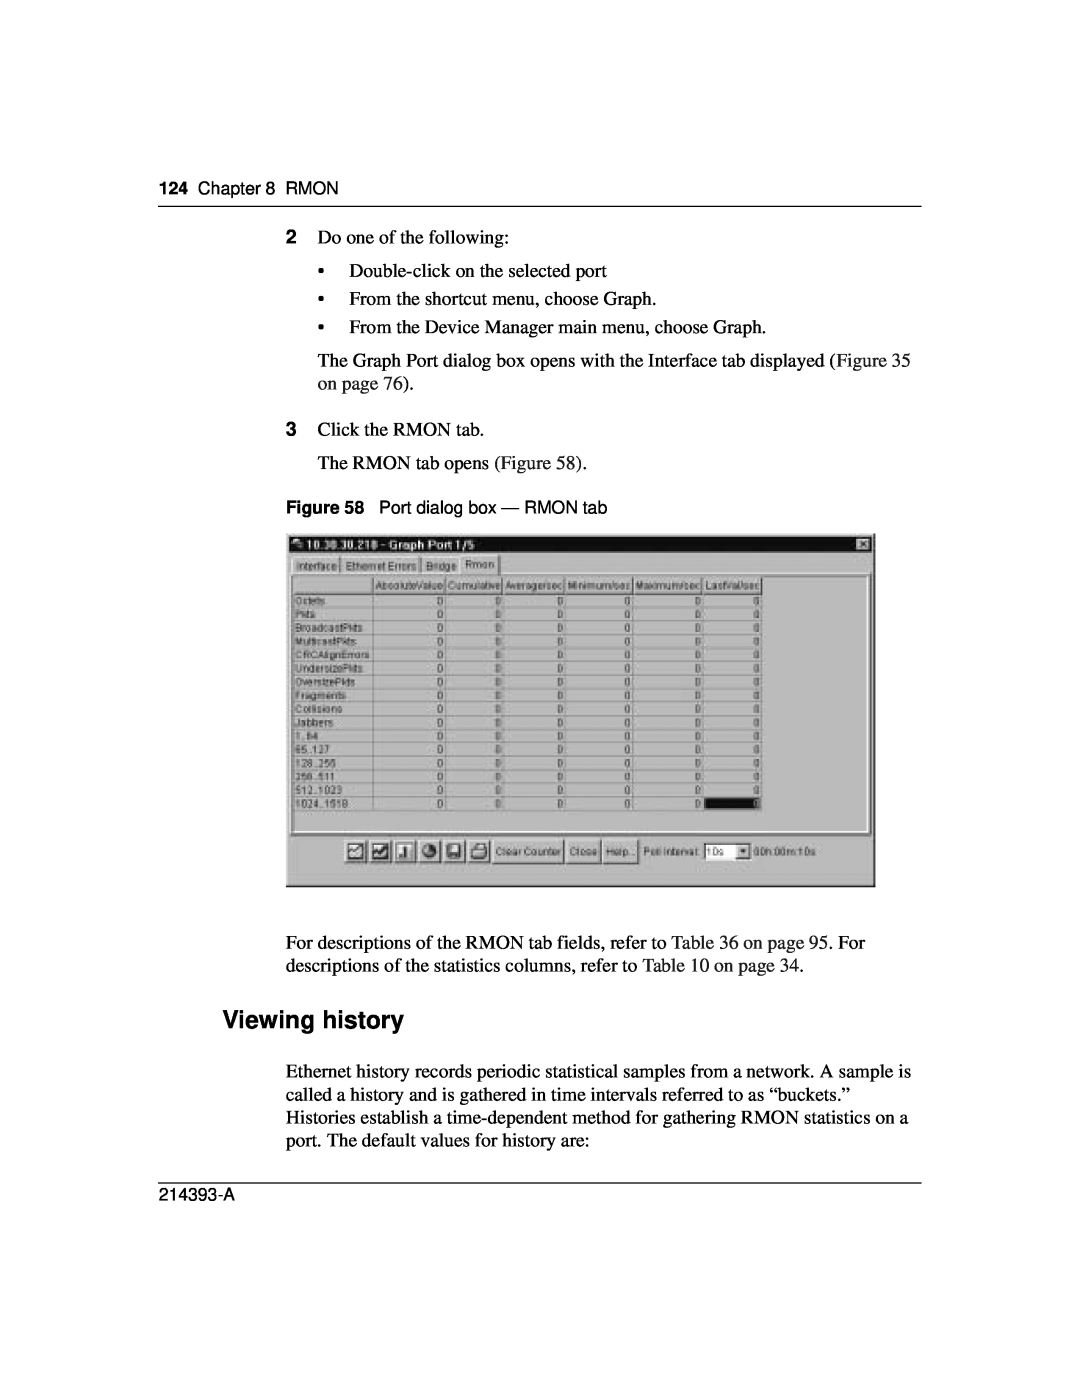 Nortel Networks 214393-A manual Viewing history 